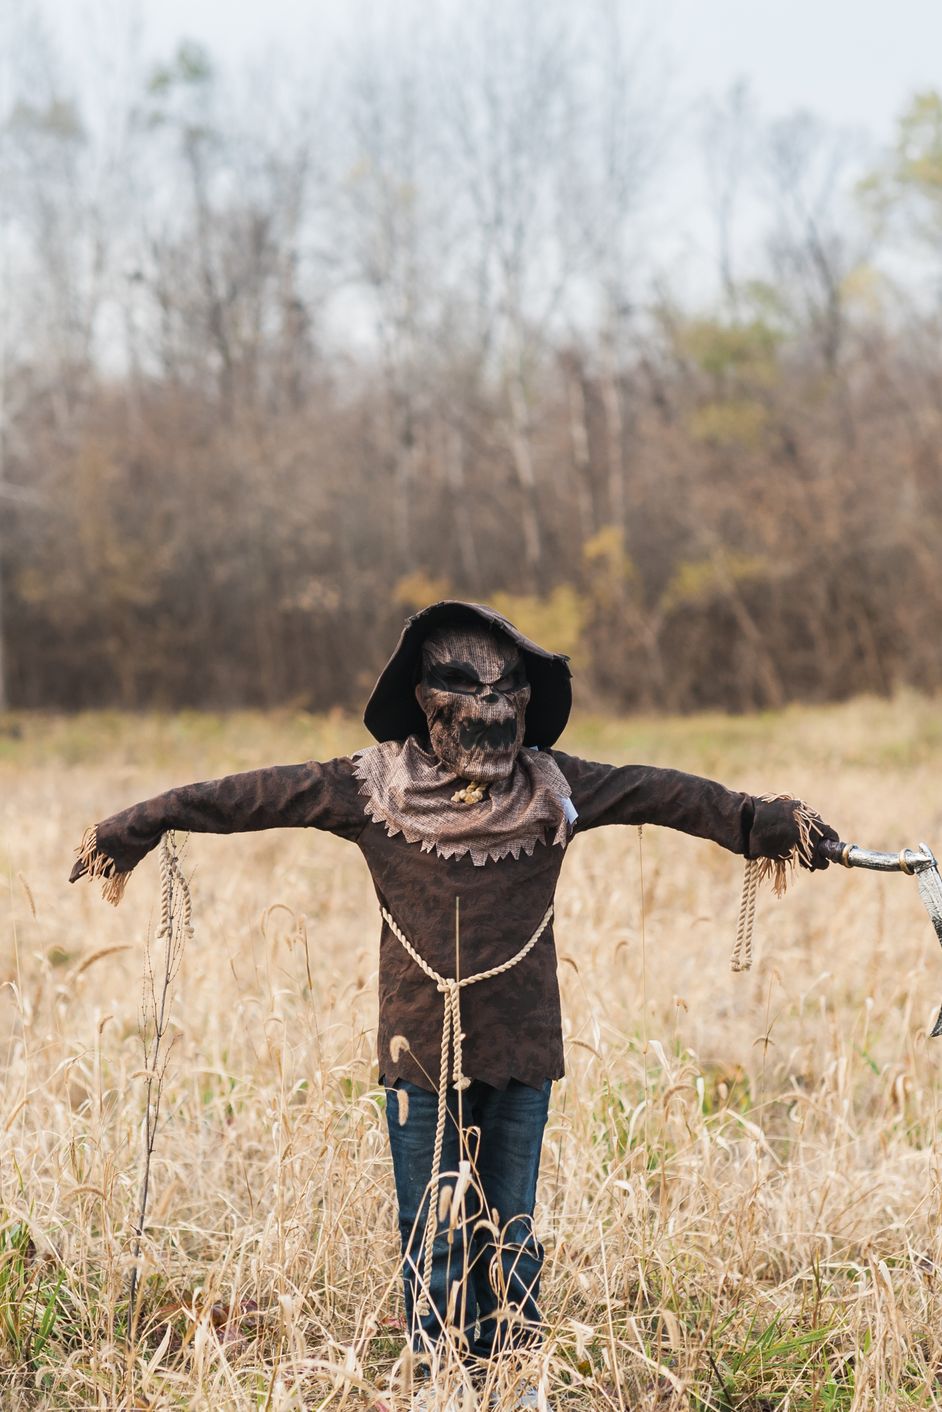 homemade scary scarecrow mask